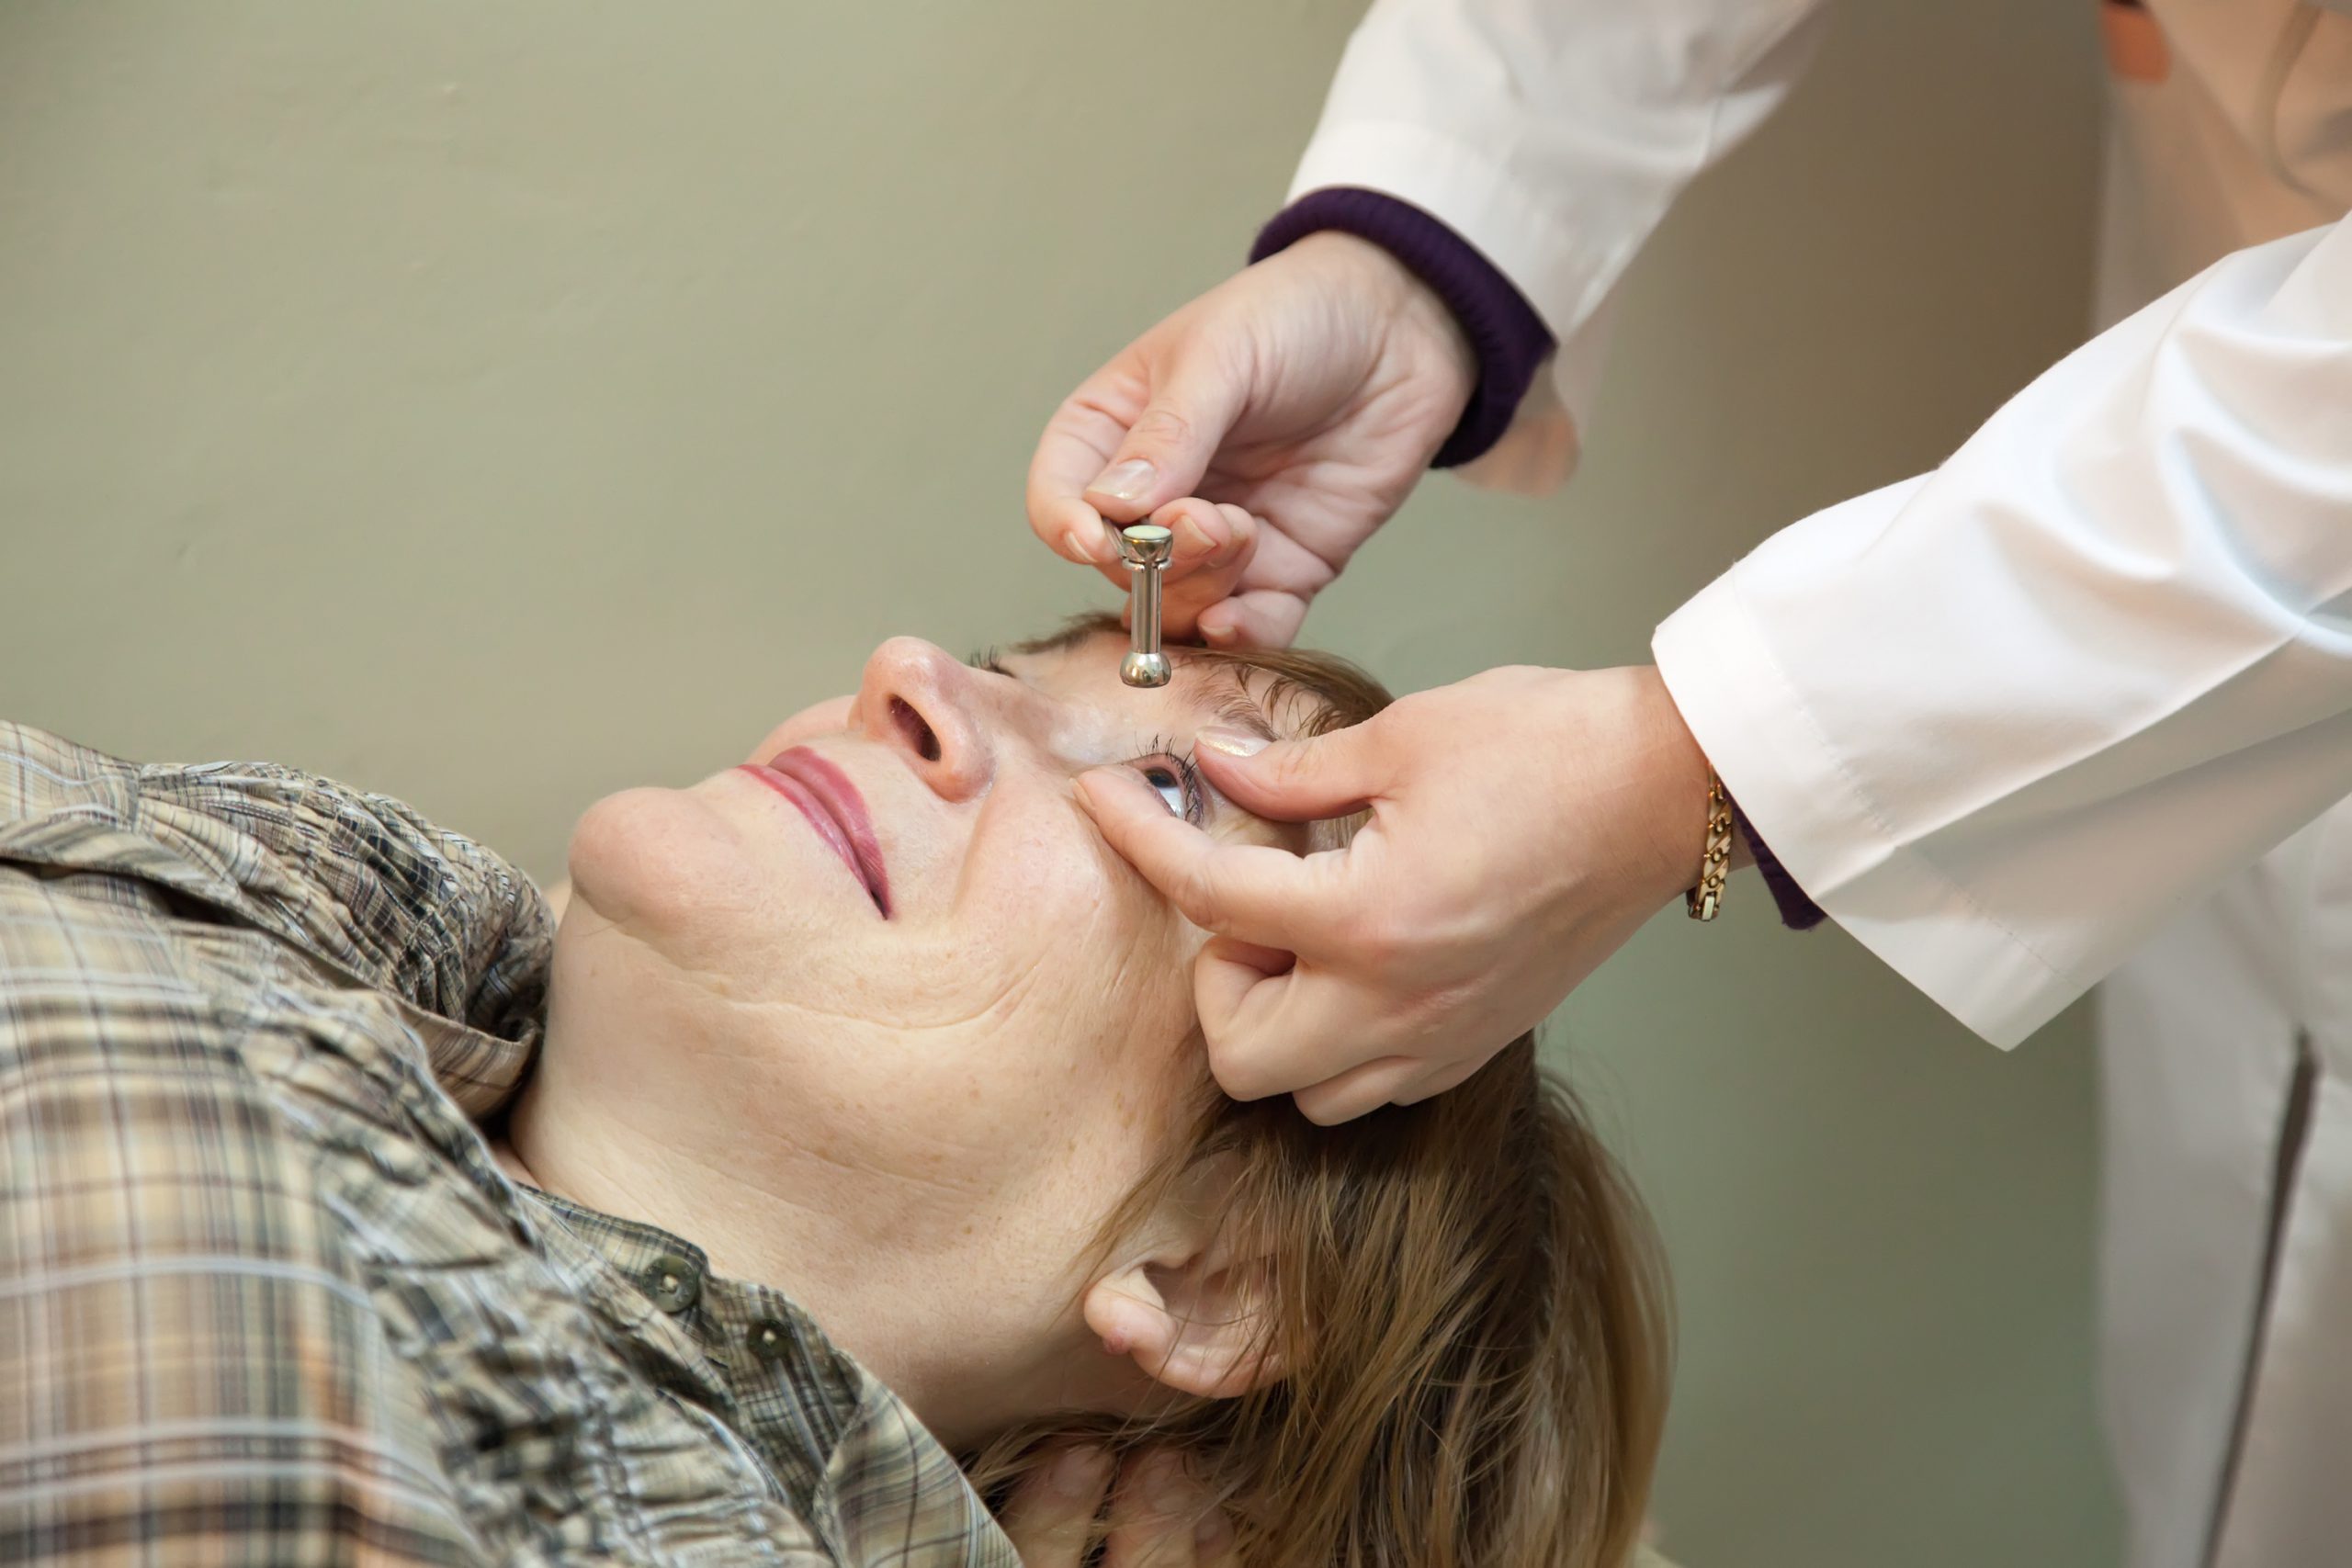 Ophthalmologist measures the  ocular tension in patients